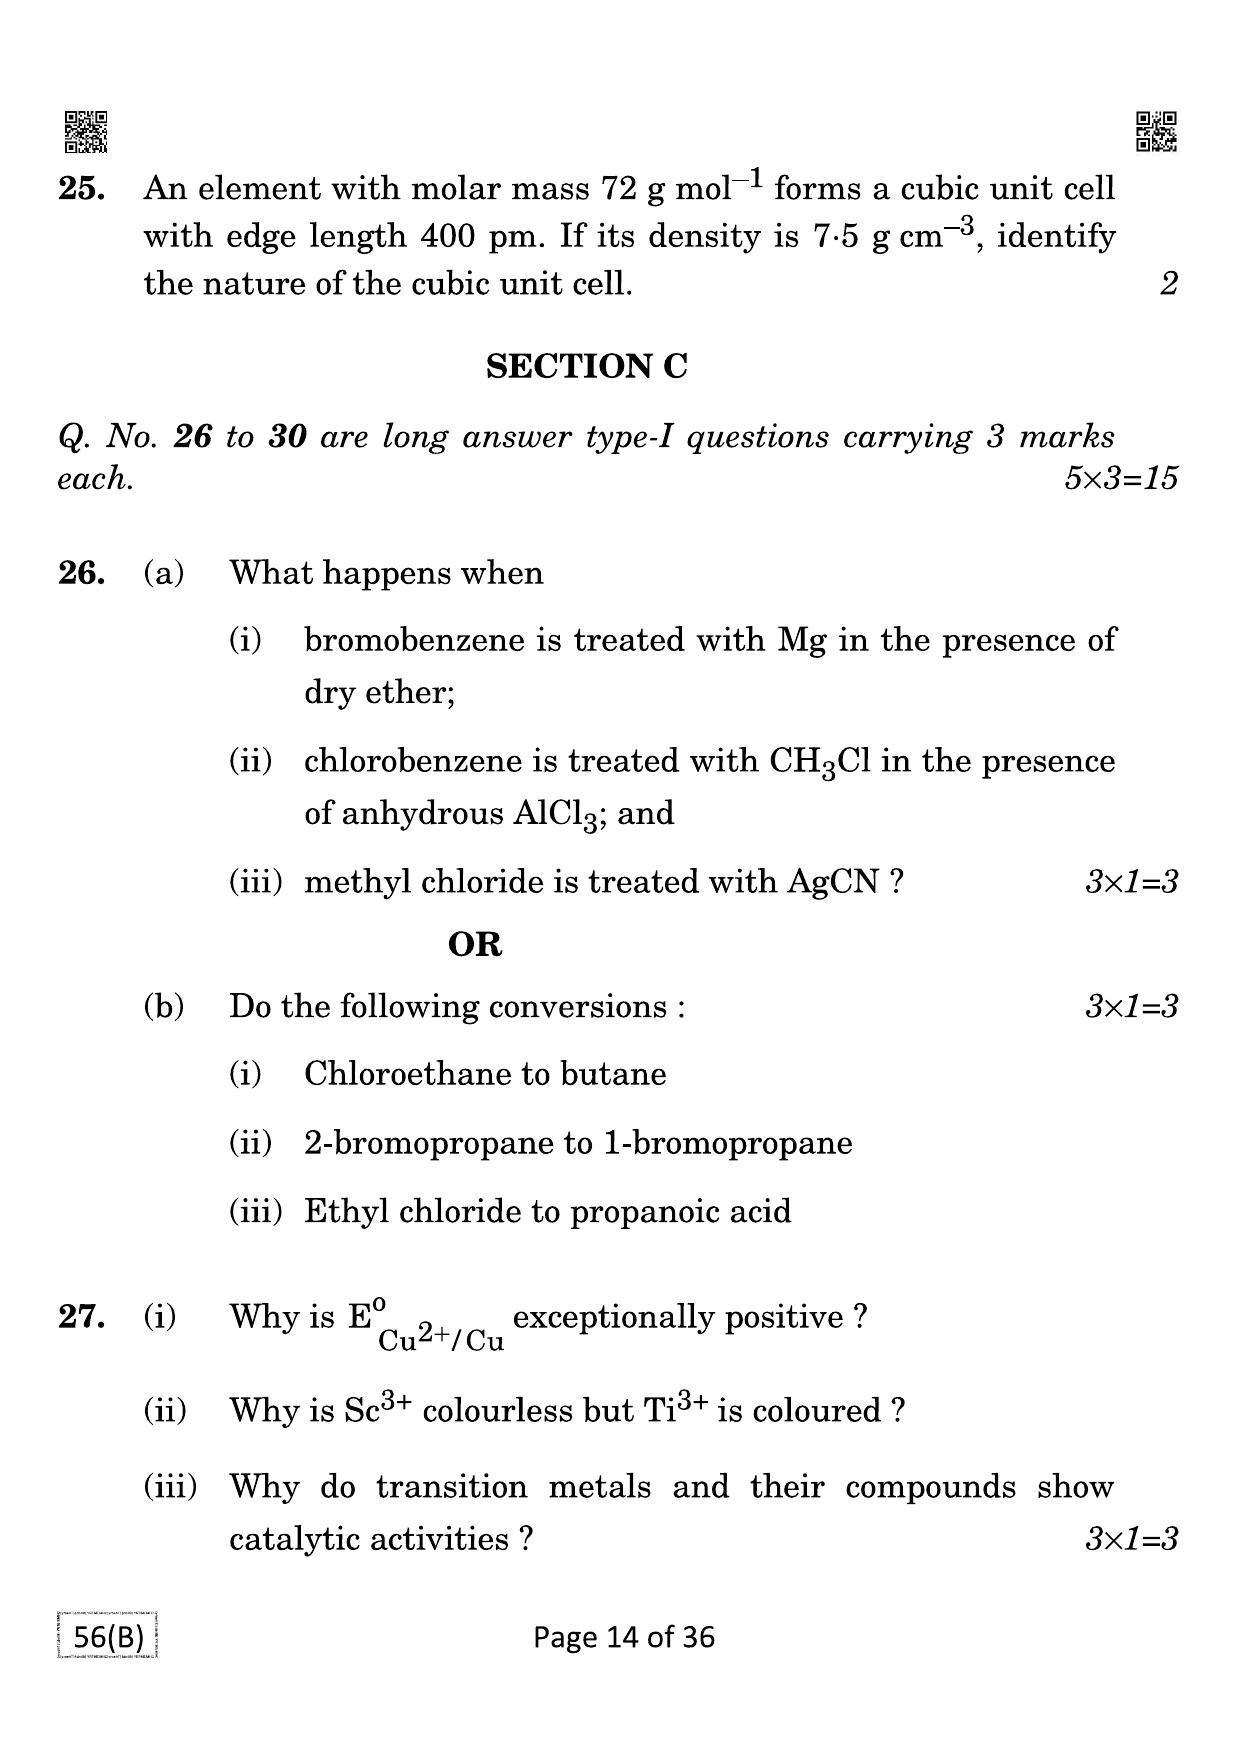 CBSE Class 12 QP_043_CHEMISTRY_FOR_BLIND_CANDIDATES 2021 Compartment Question Paper - Page 14